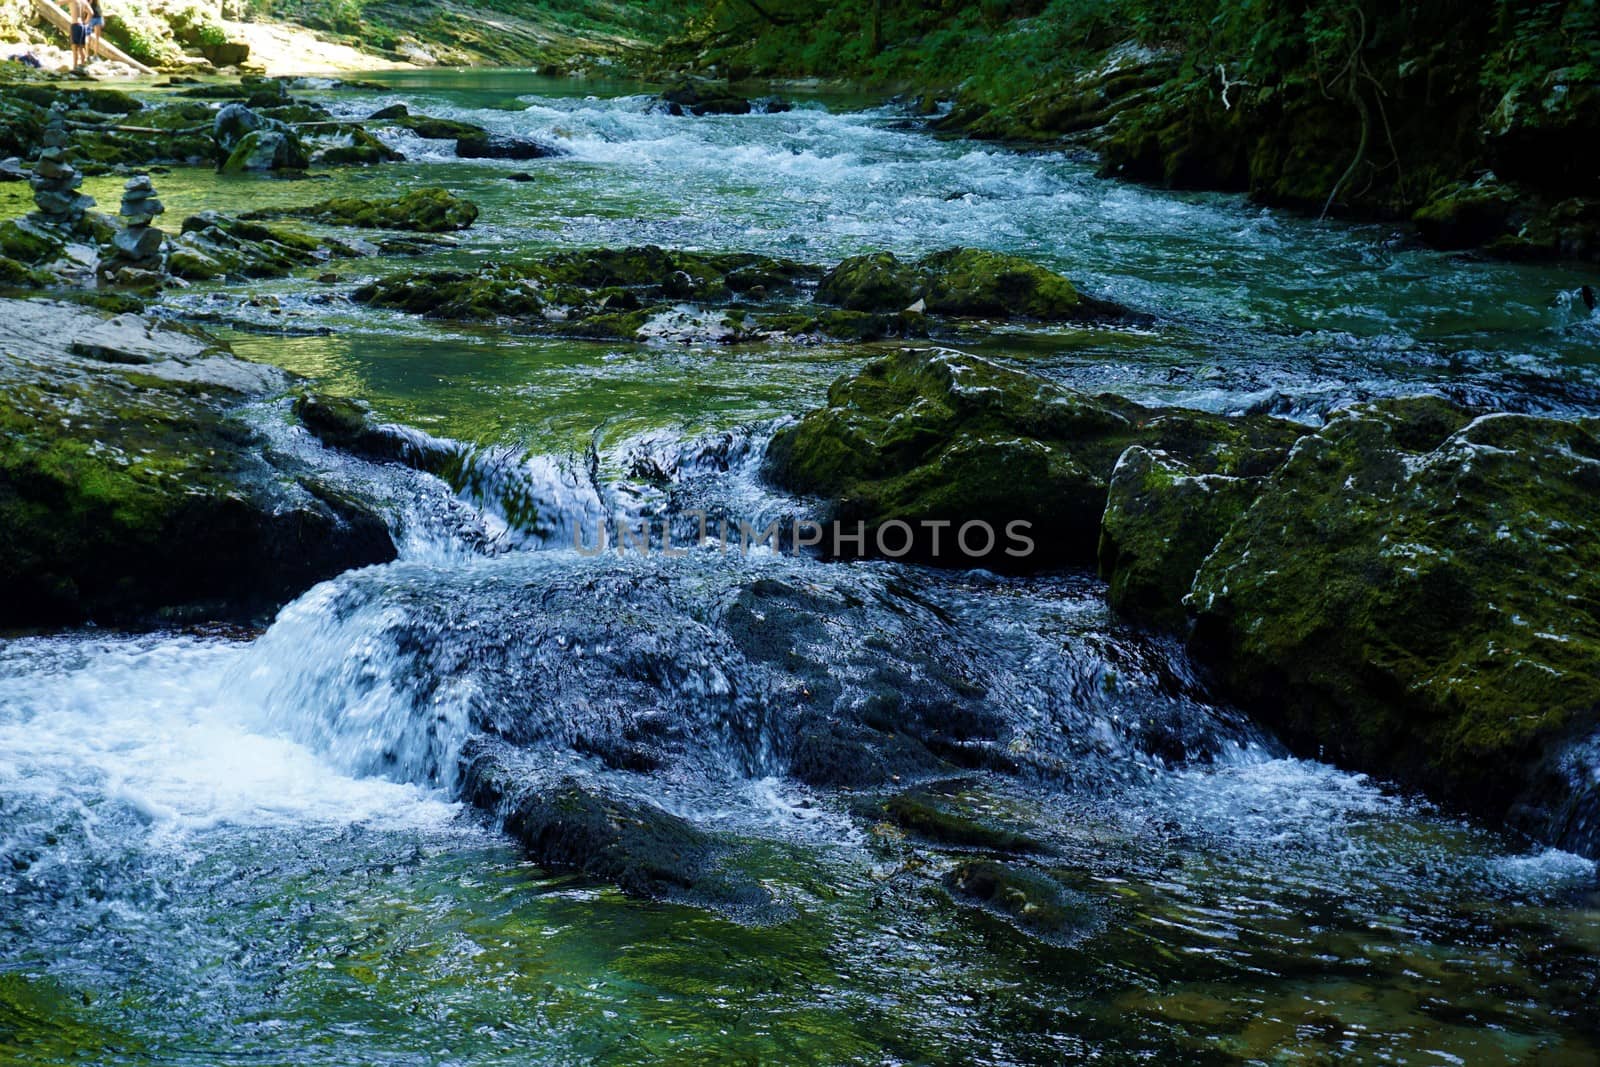 Mossy rocks in the Radovna river near Podhom by pisces2386